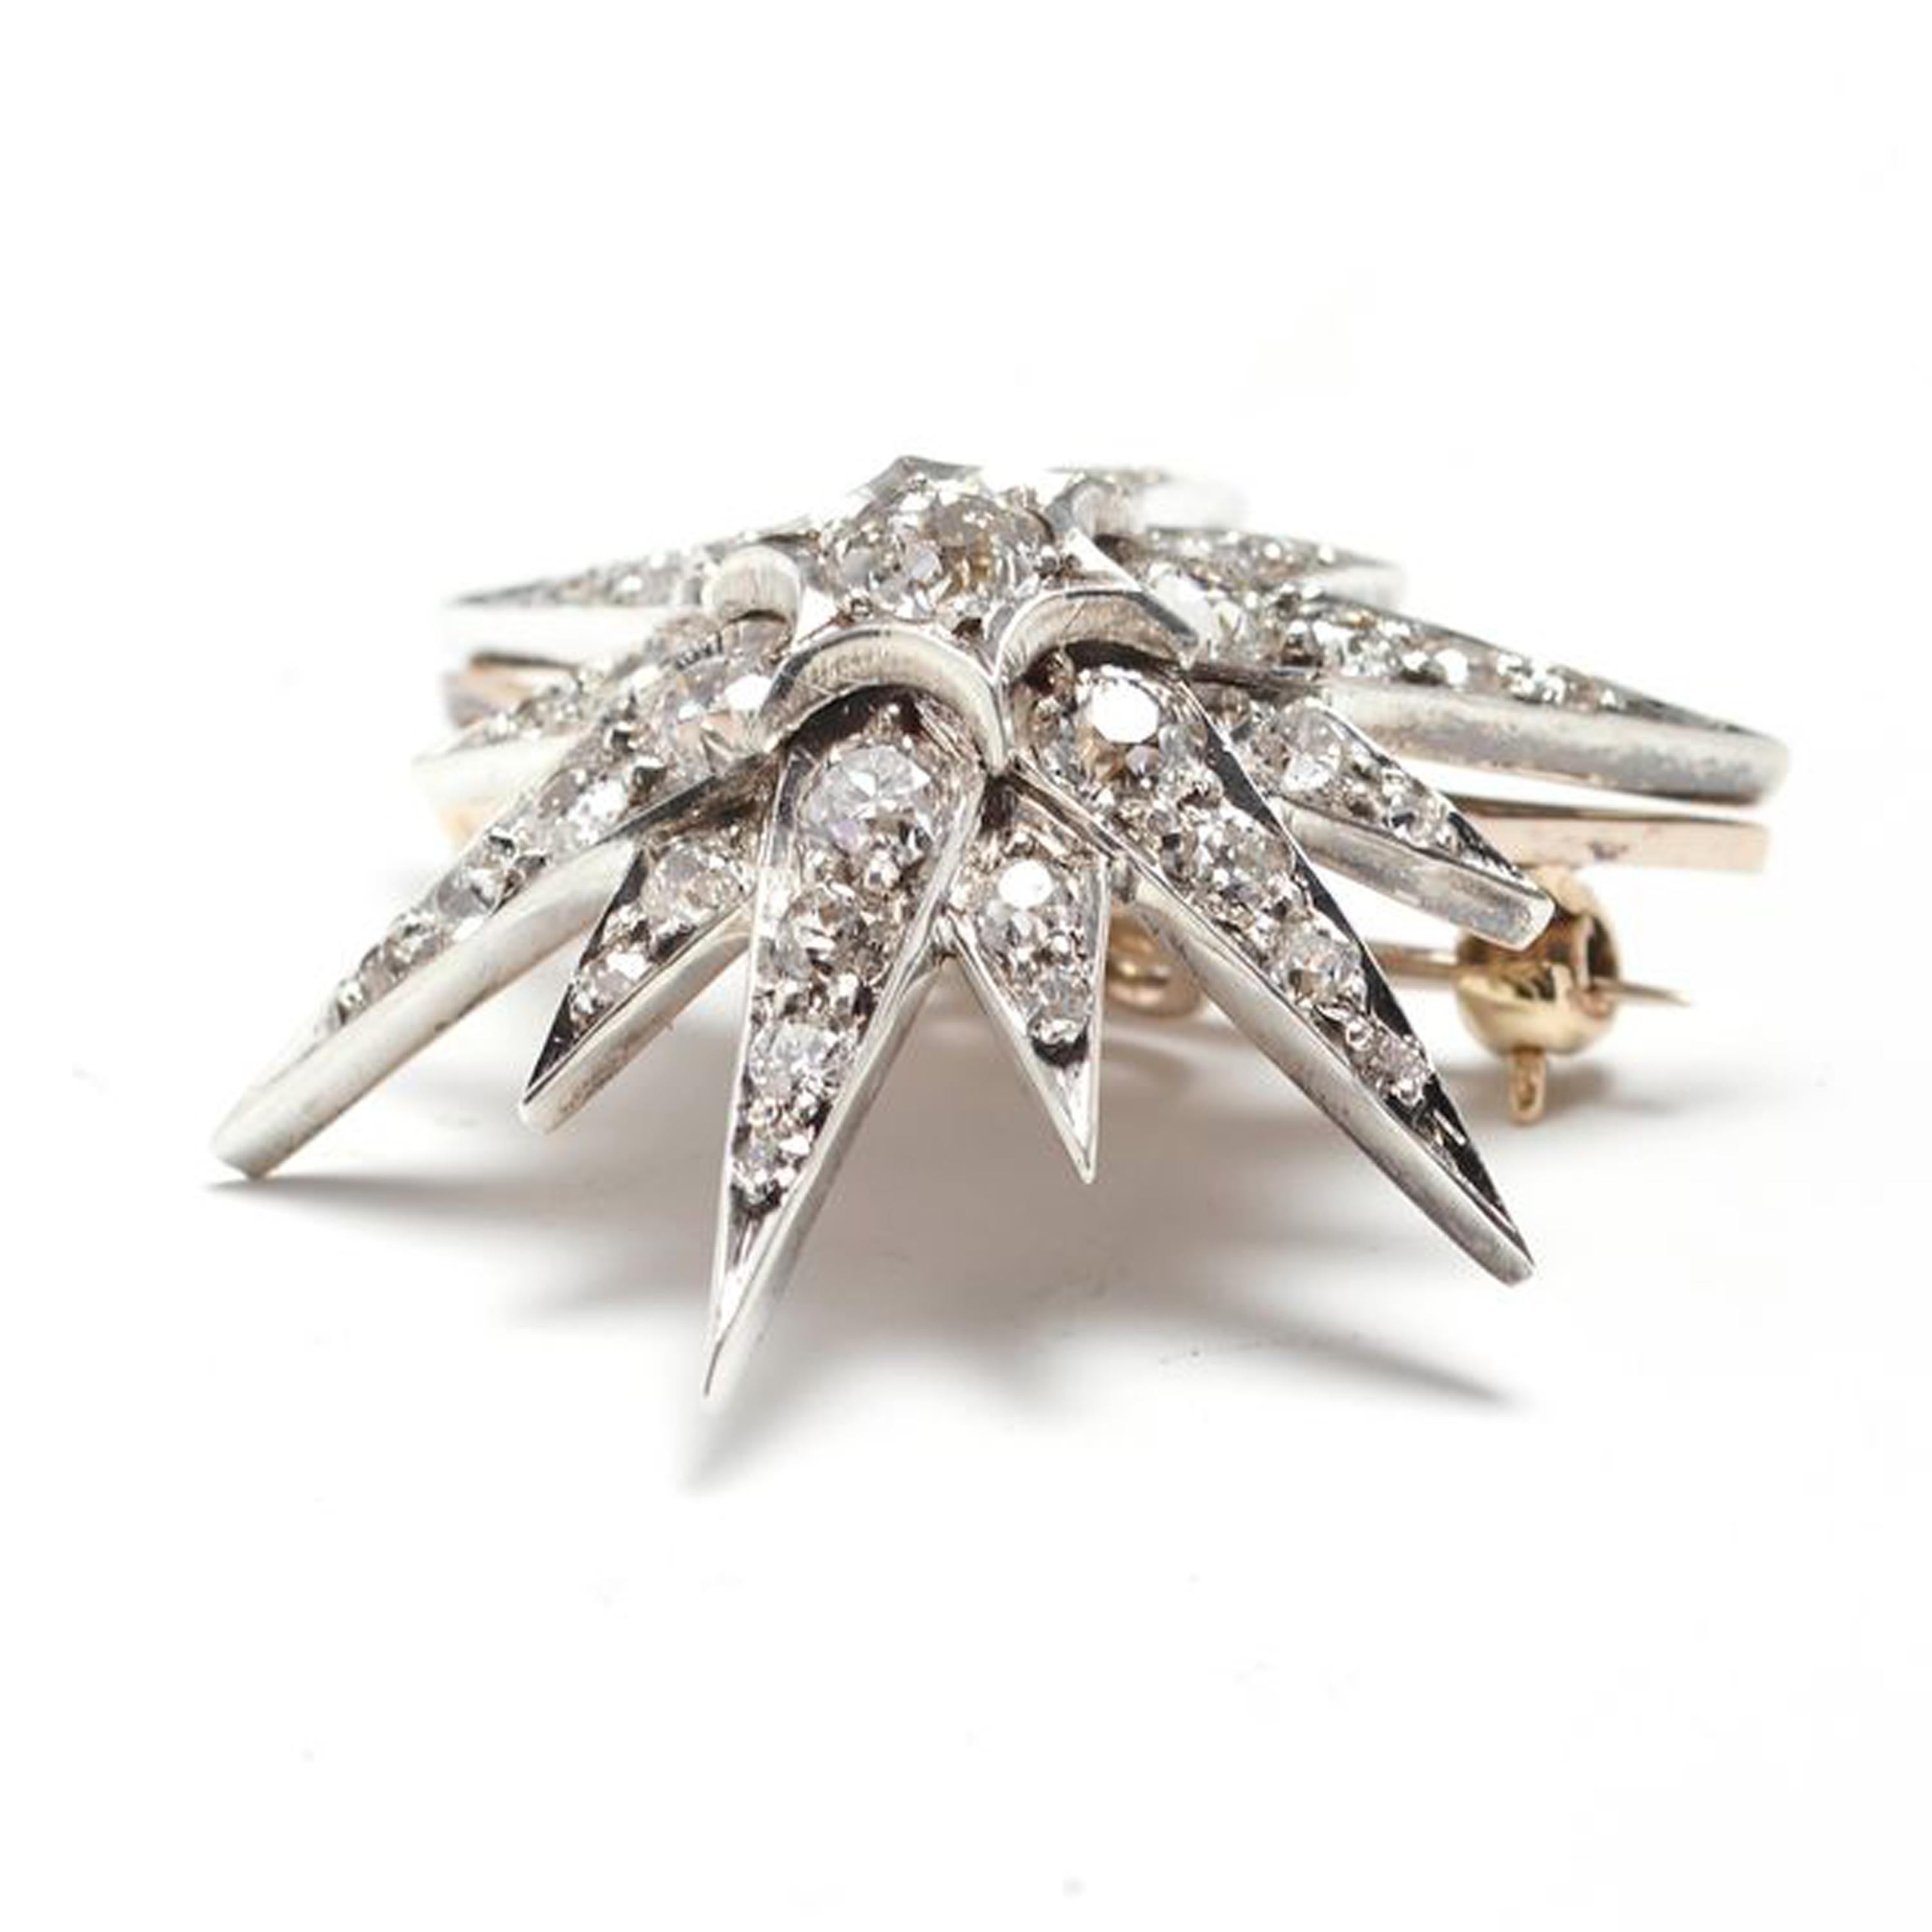 Late Victorian Antique Diamond and Silver Upon Gold Star Brooch, Circa 1890 For Sale